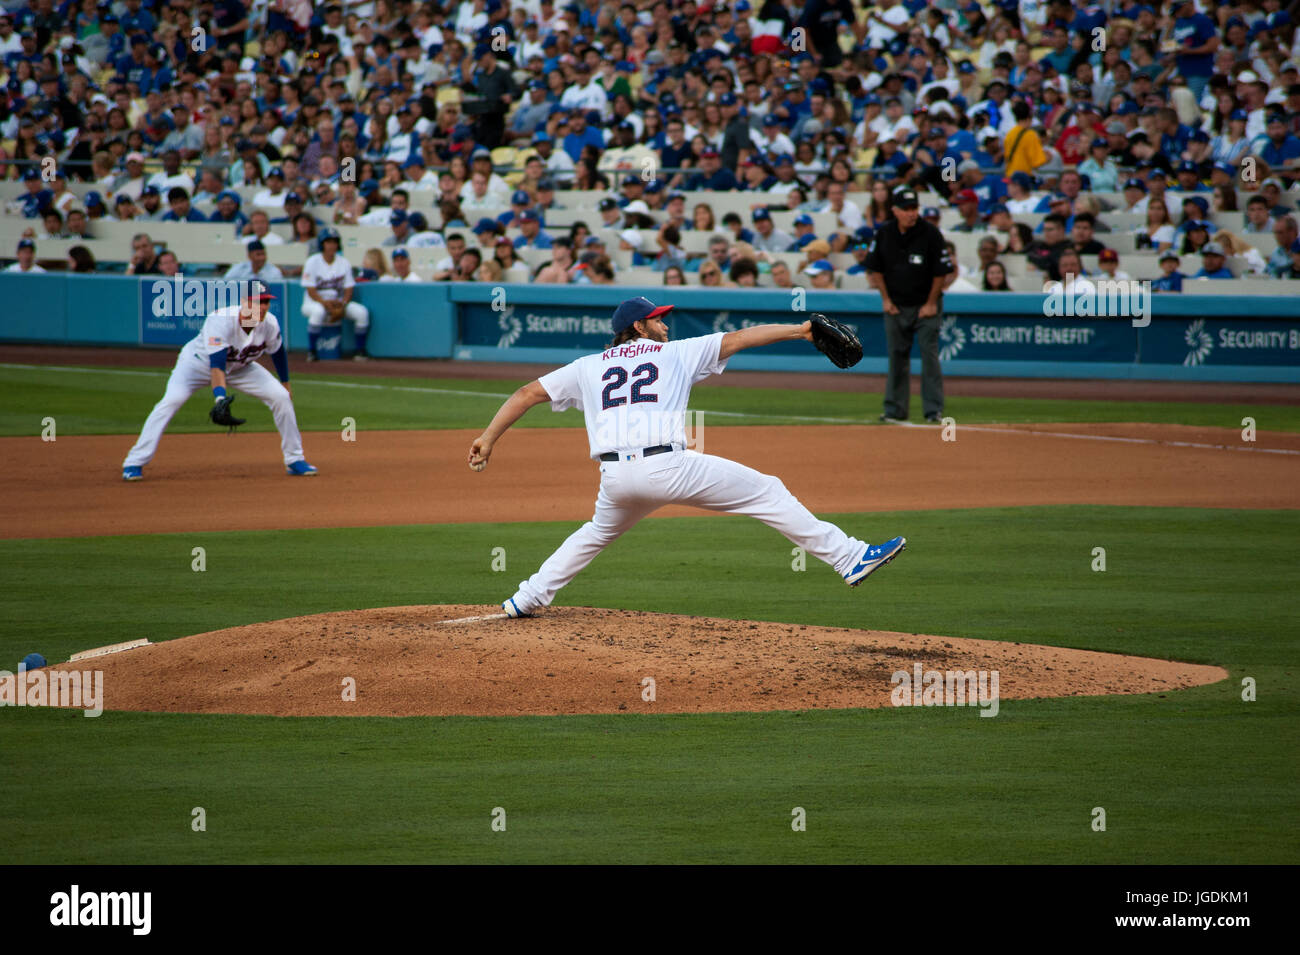 Dodger ace pitcher Clayton Kershaw pitching at Dodger Stadium in Los Angeles, CA Stock Photo